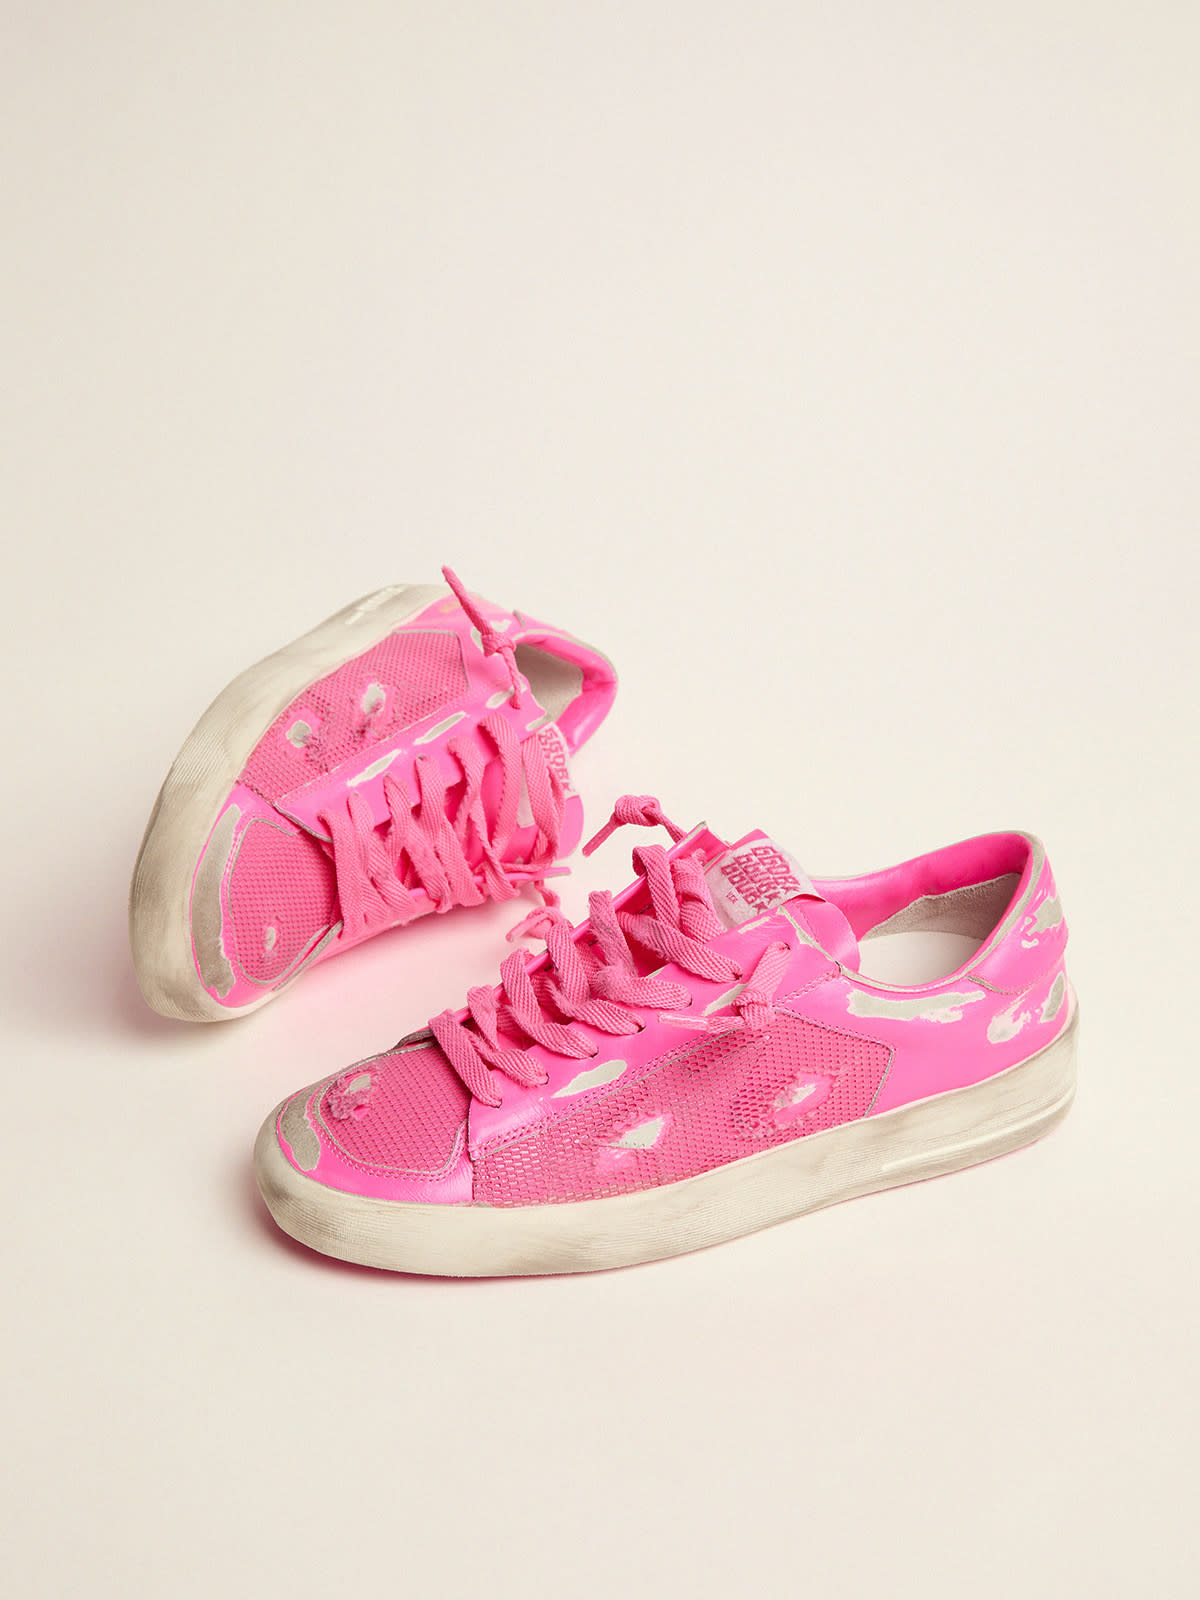 Golden Goose - Men’s Stardan sneakers in fluorescent pink leather and mesh in 